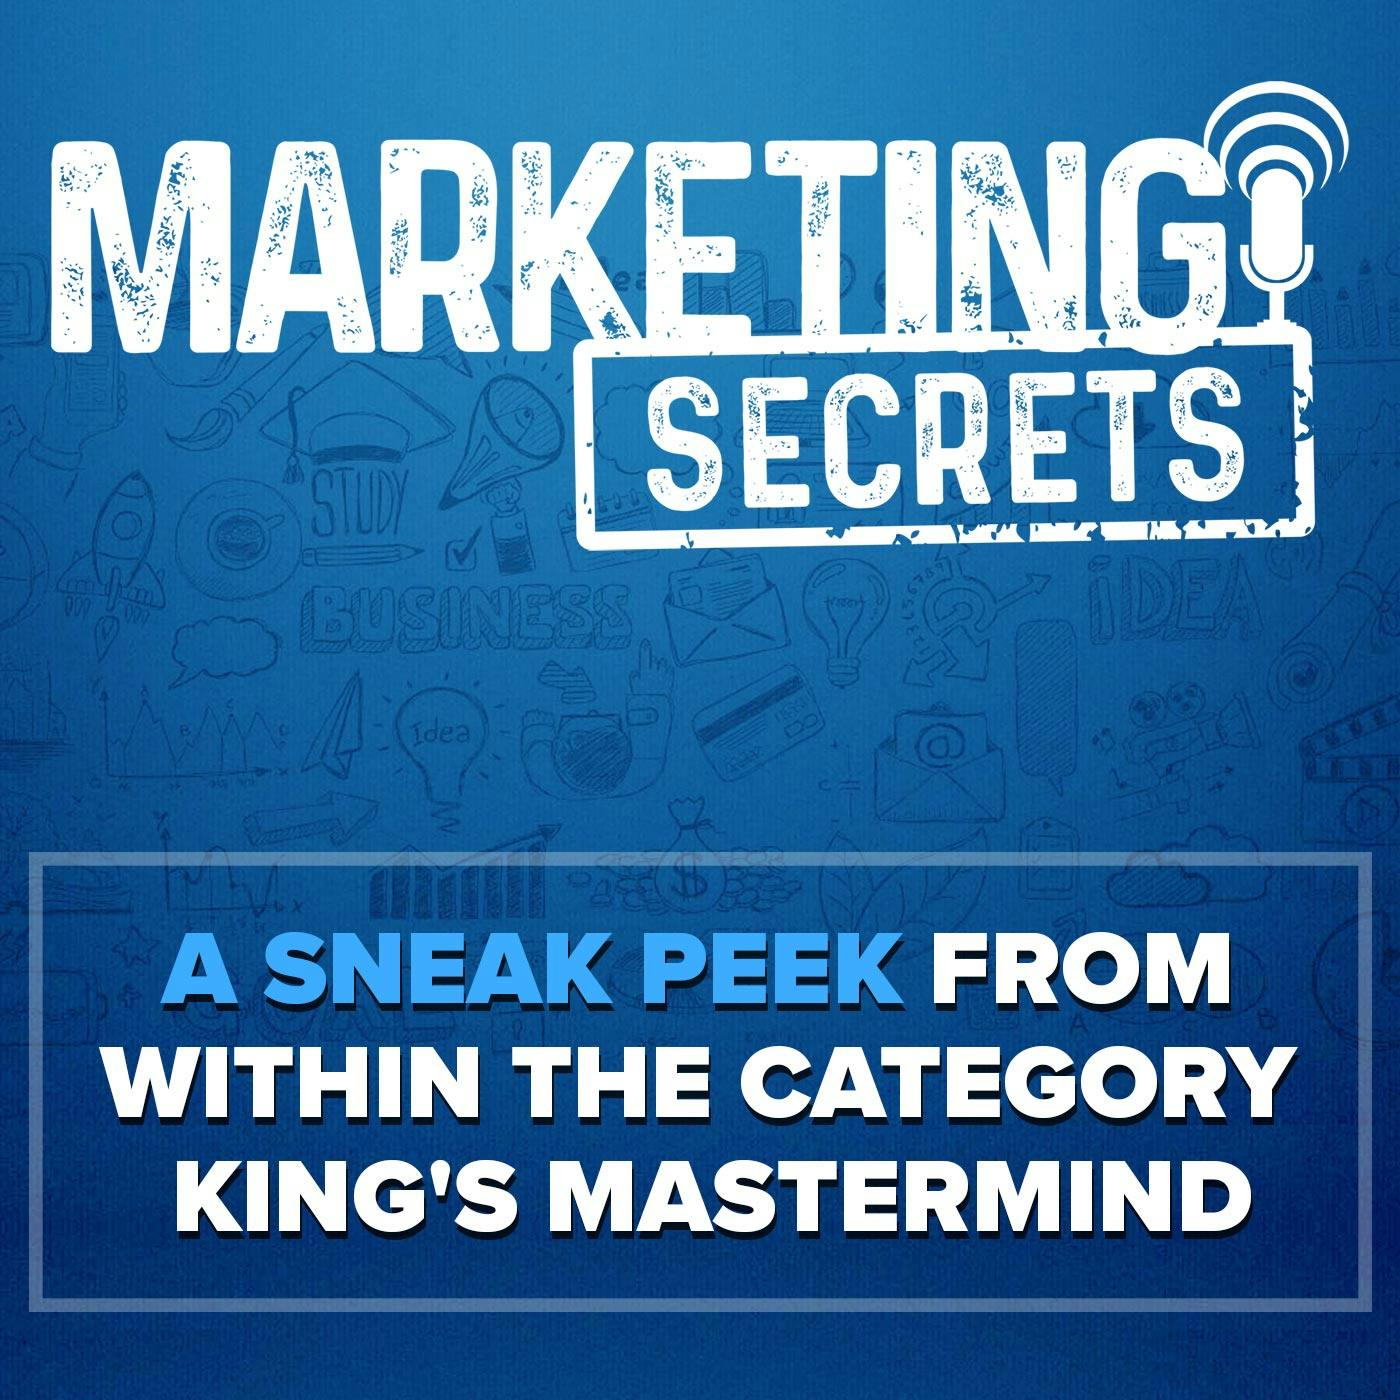 A Sneak Peek from Within the Category King's Mastermind